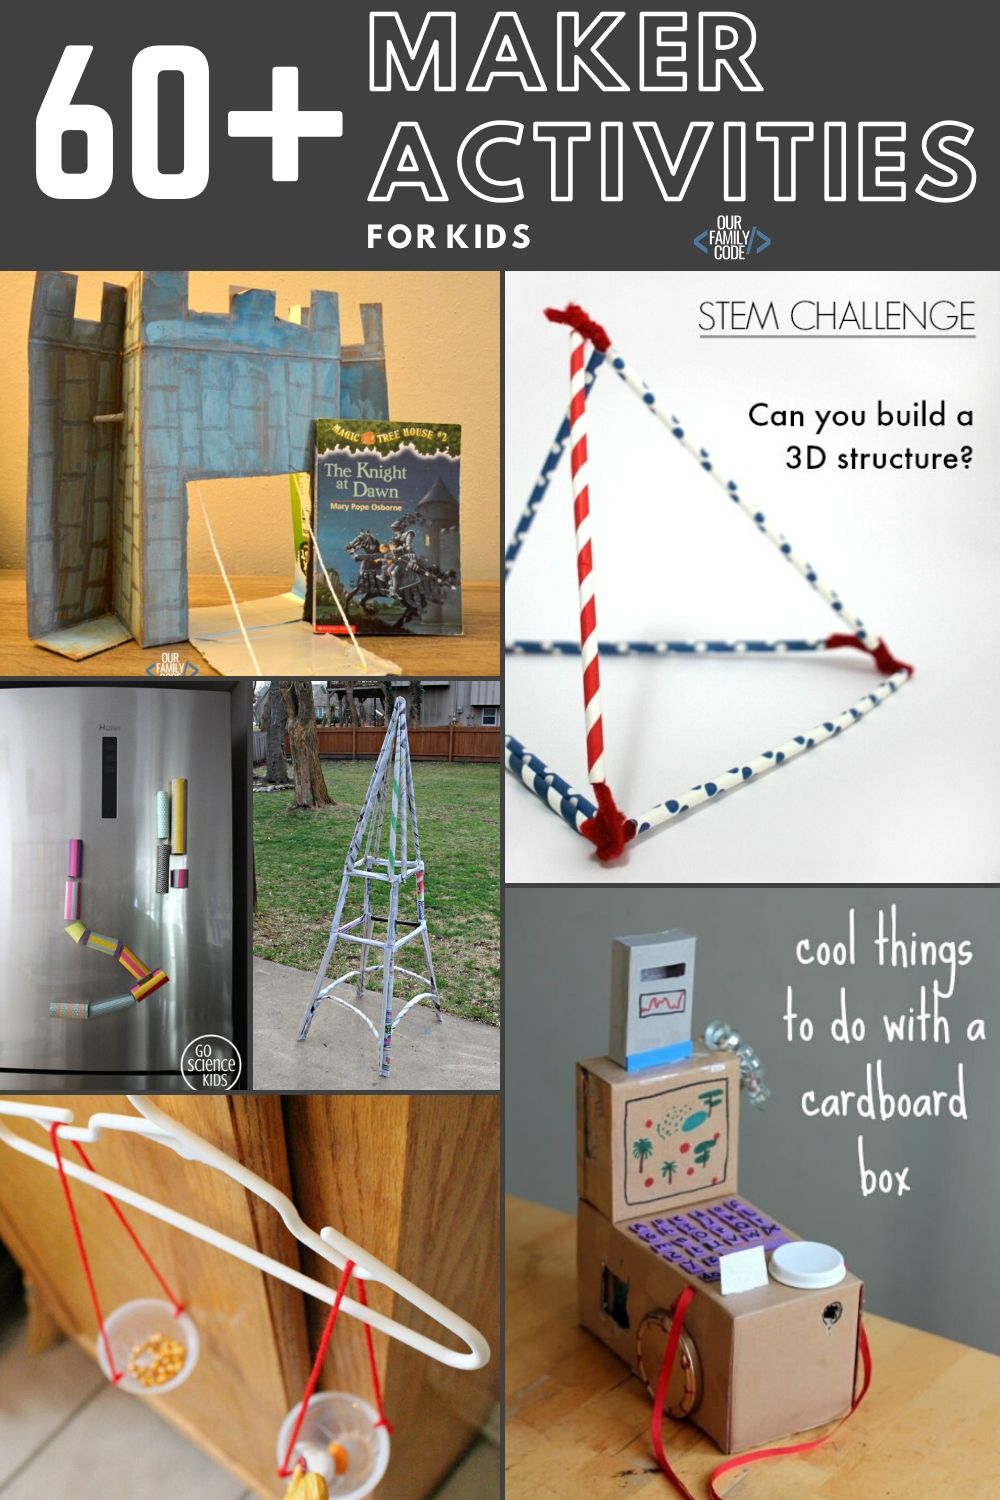 A picture with a range of STEM maker activities for kids in a collage.